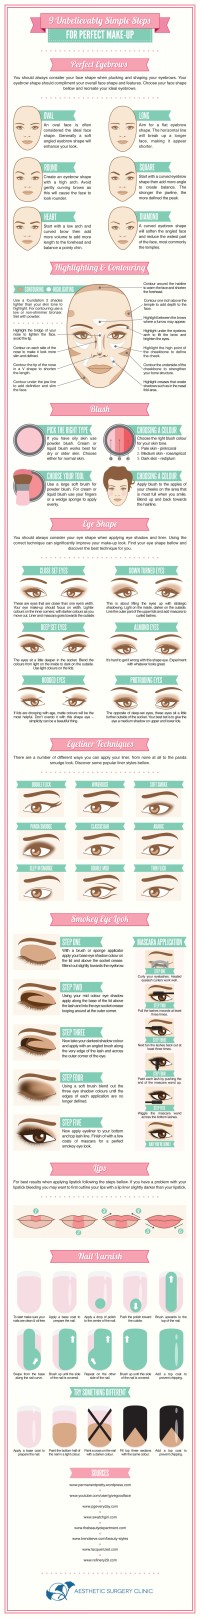 9 Unbelievably Simple Steps For Perfect Make-Up | From Visual.ly